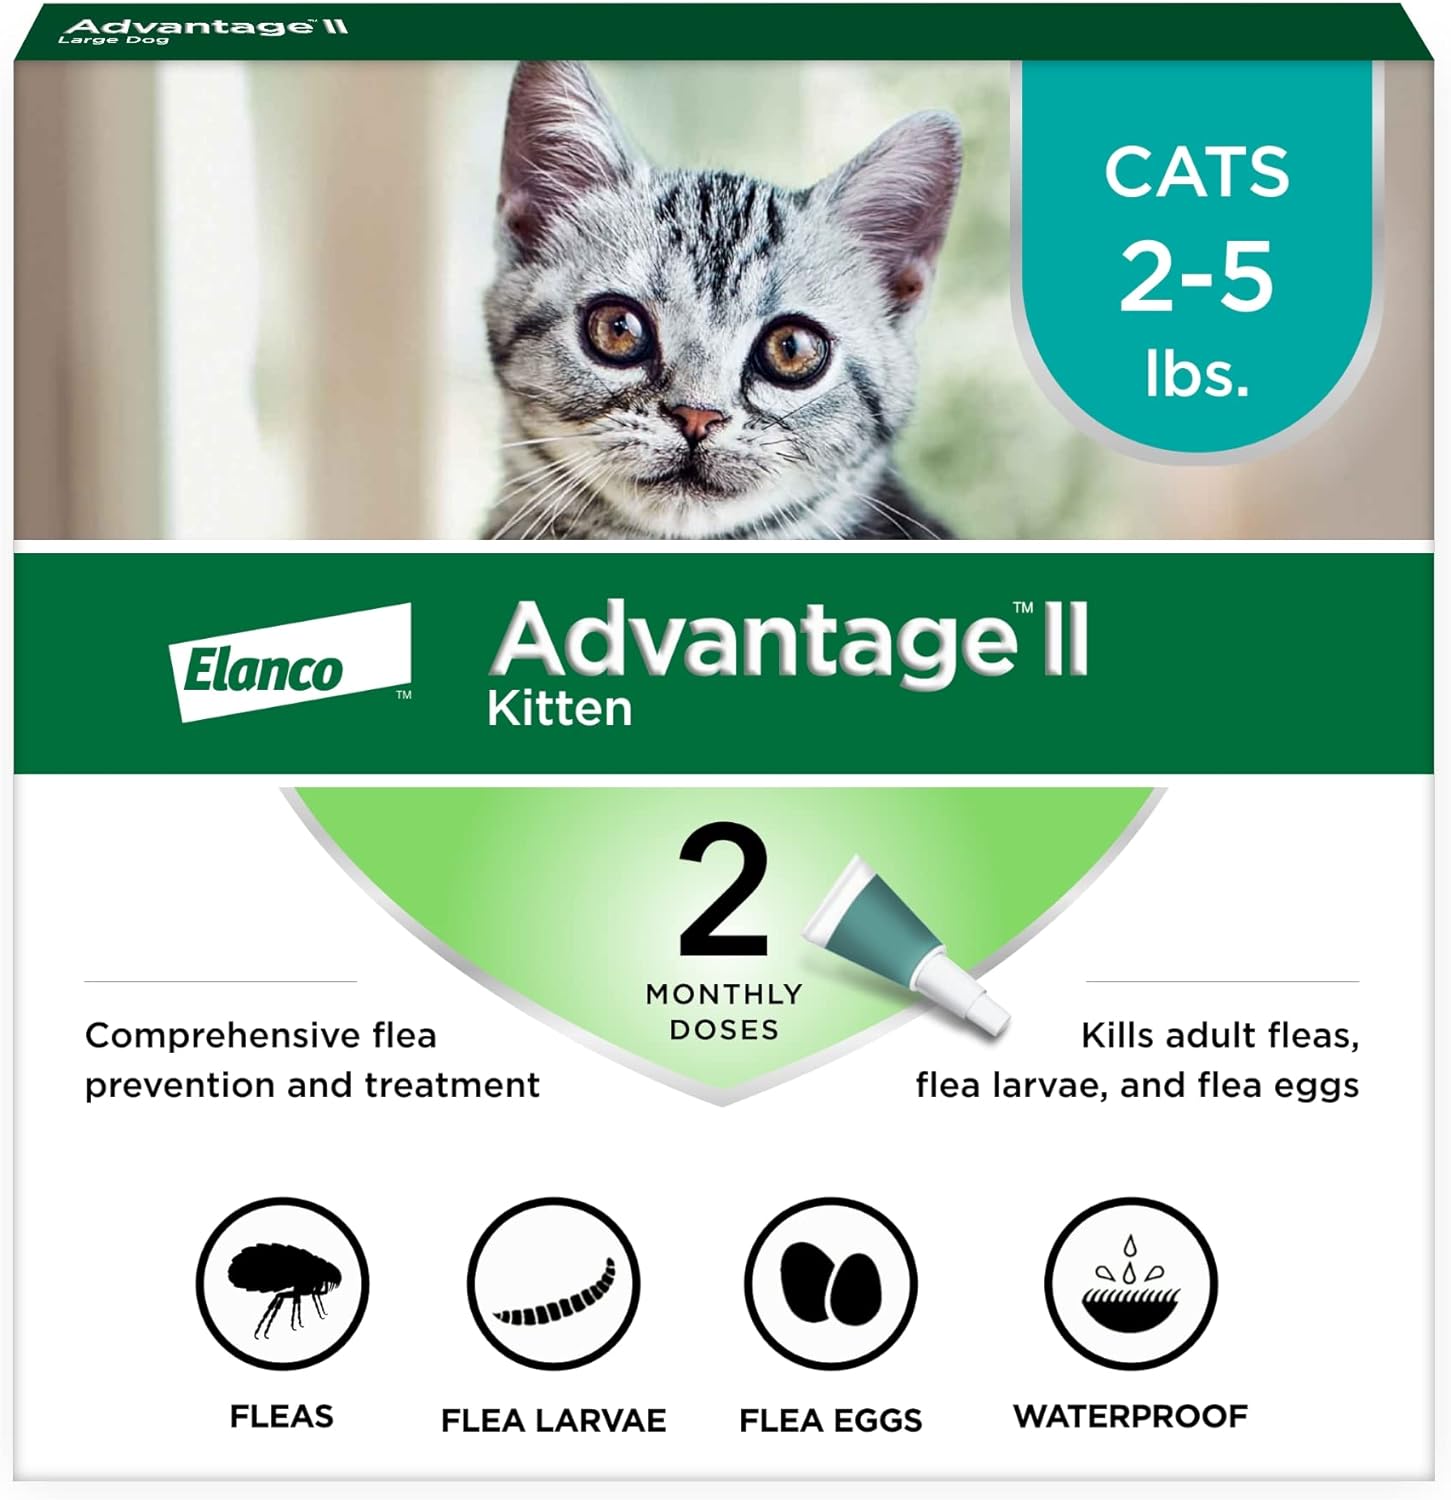 Advantage II Kitten Vet-Recommended Flea Treatment & Prevention | Cats 2-5 lbs. | 2-Month Supply